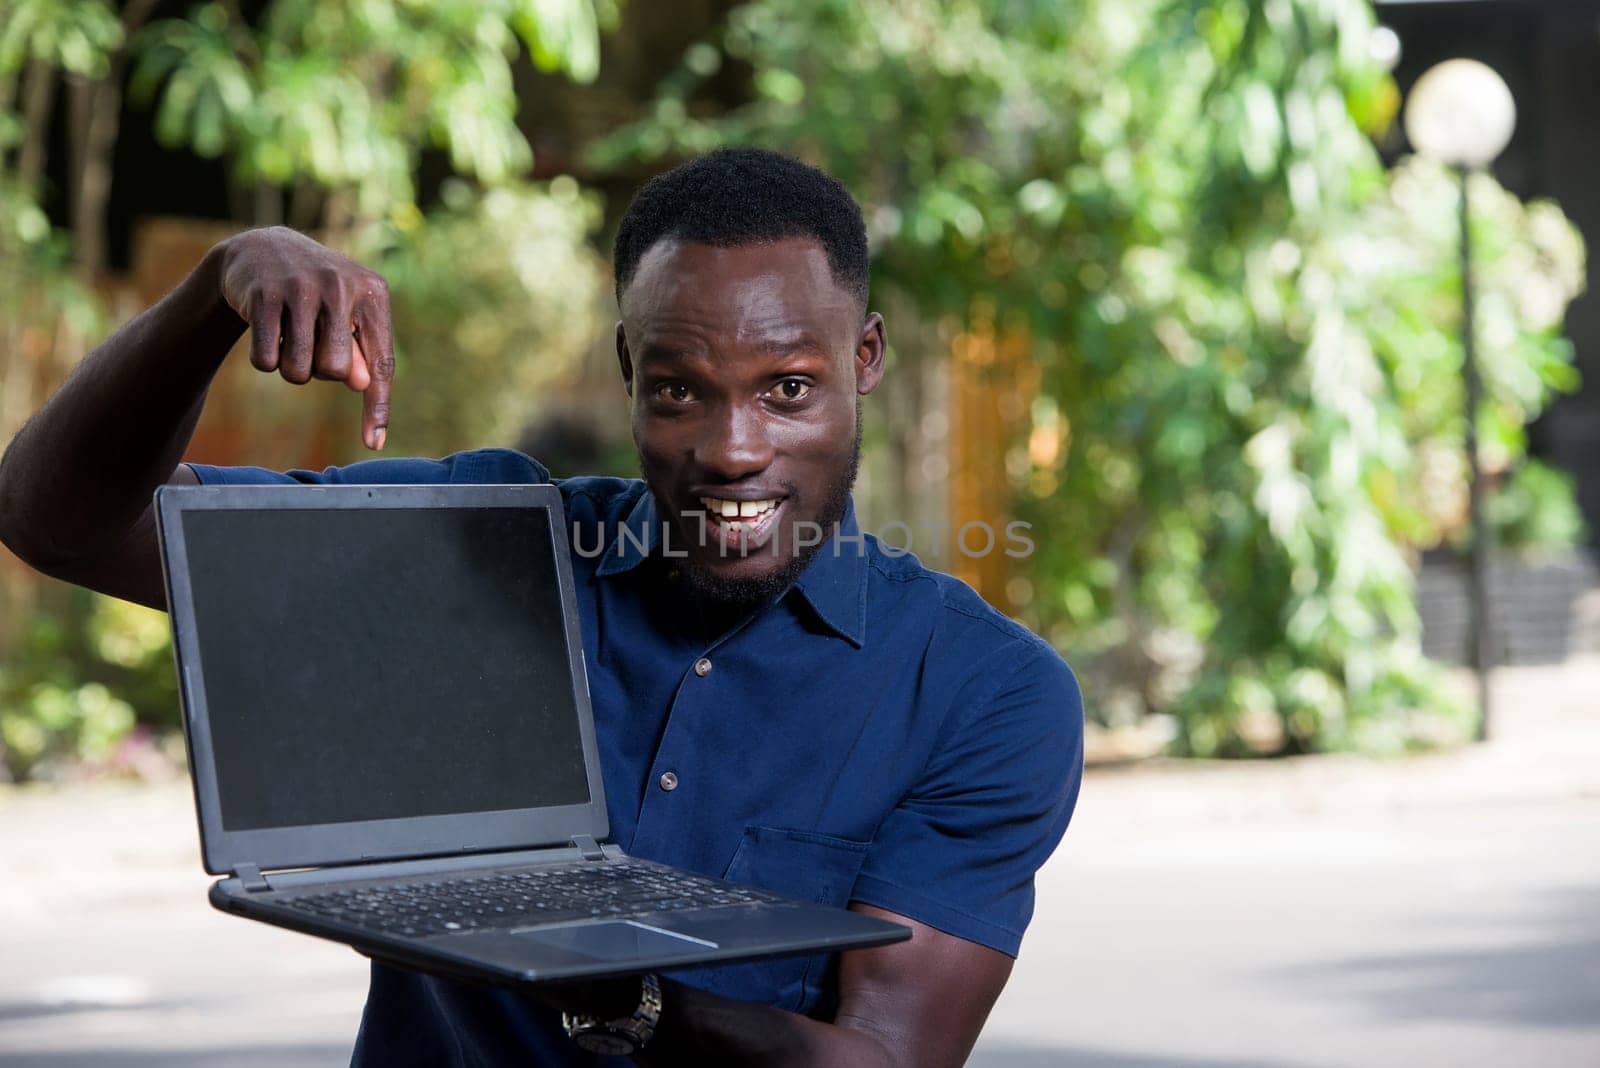 young man sitting outdoors showing laptop smiling.